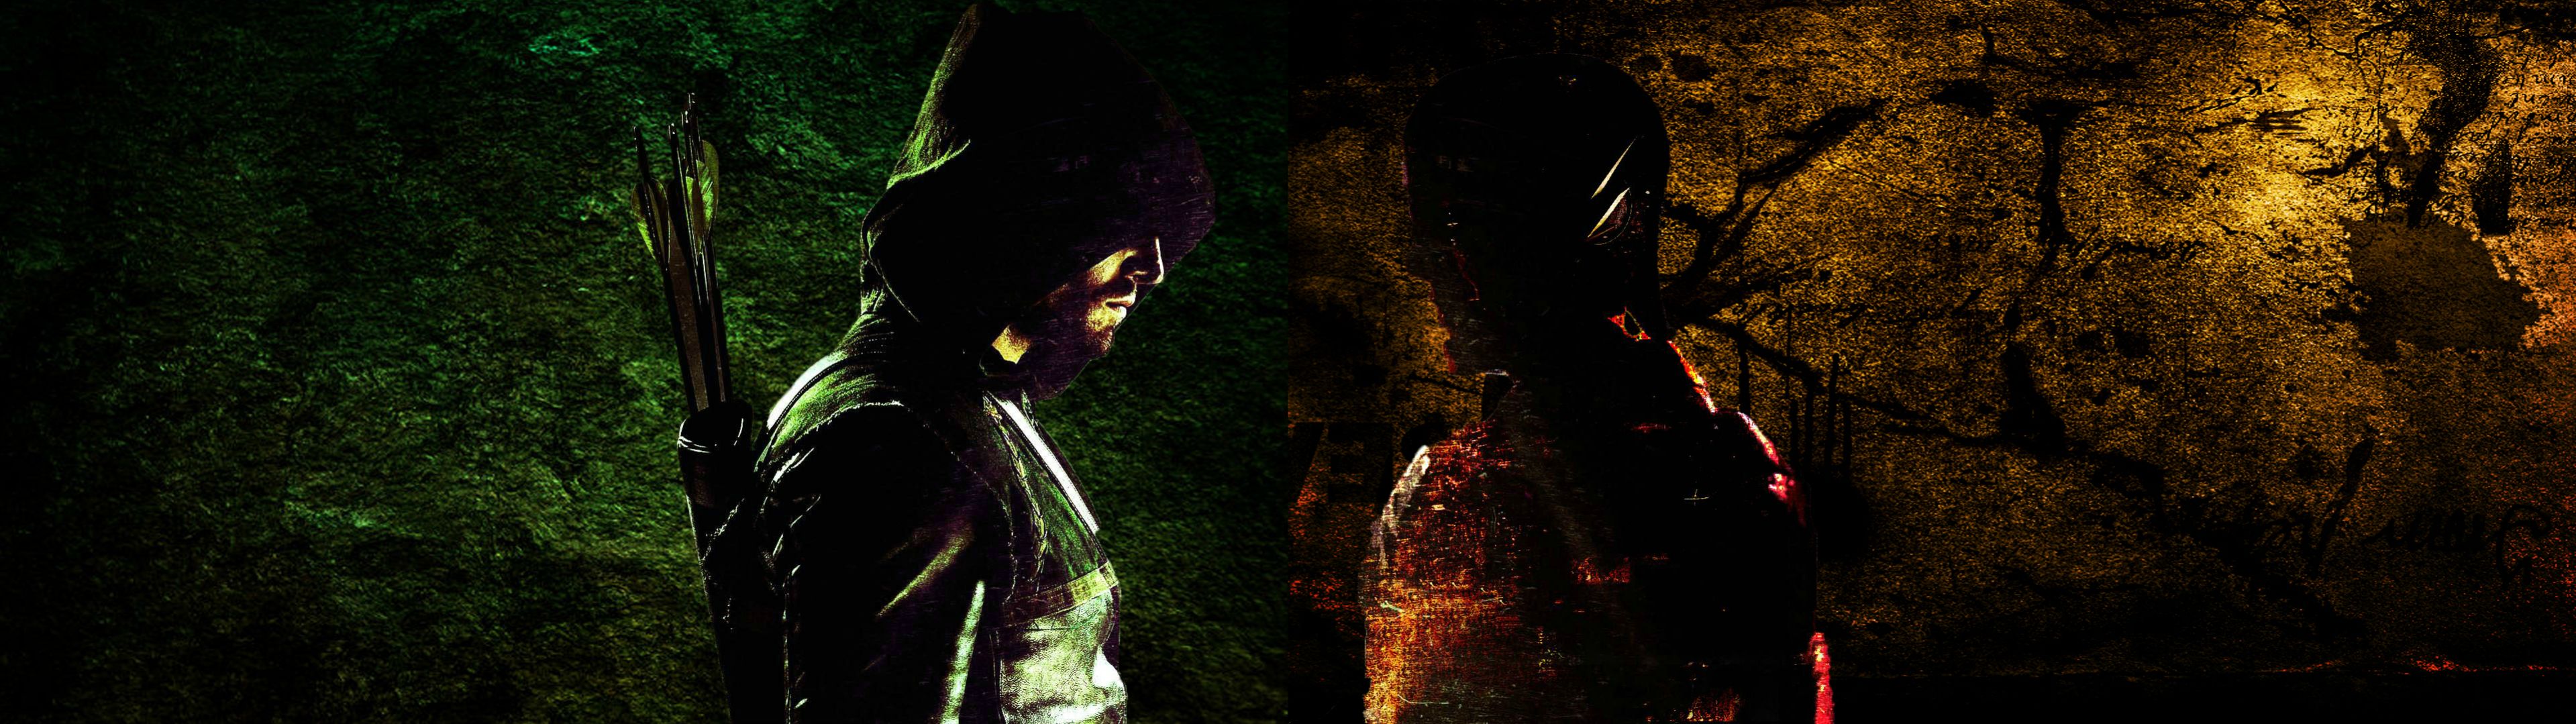 Arrow And The Flash Dual Monitor Wallpaper